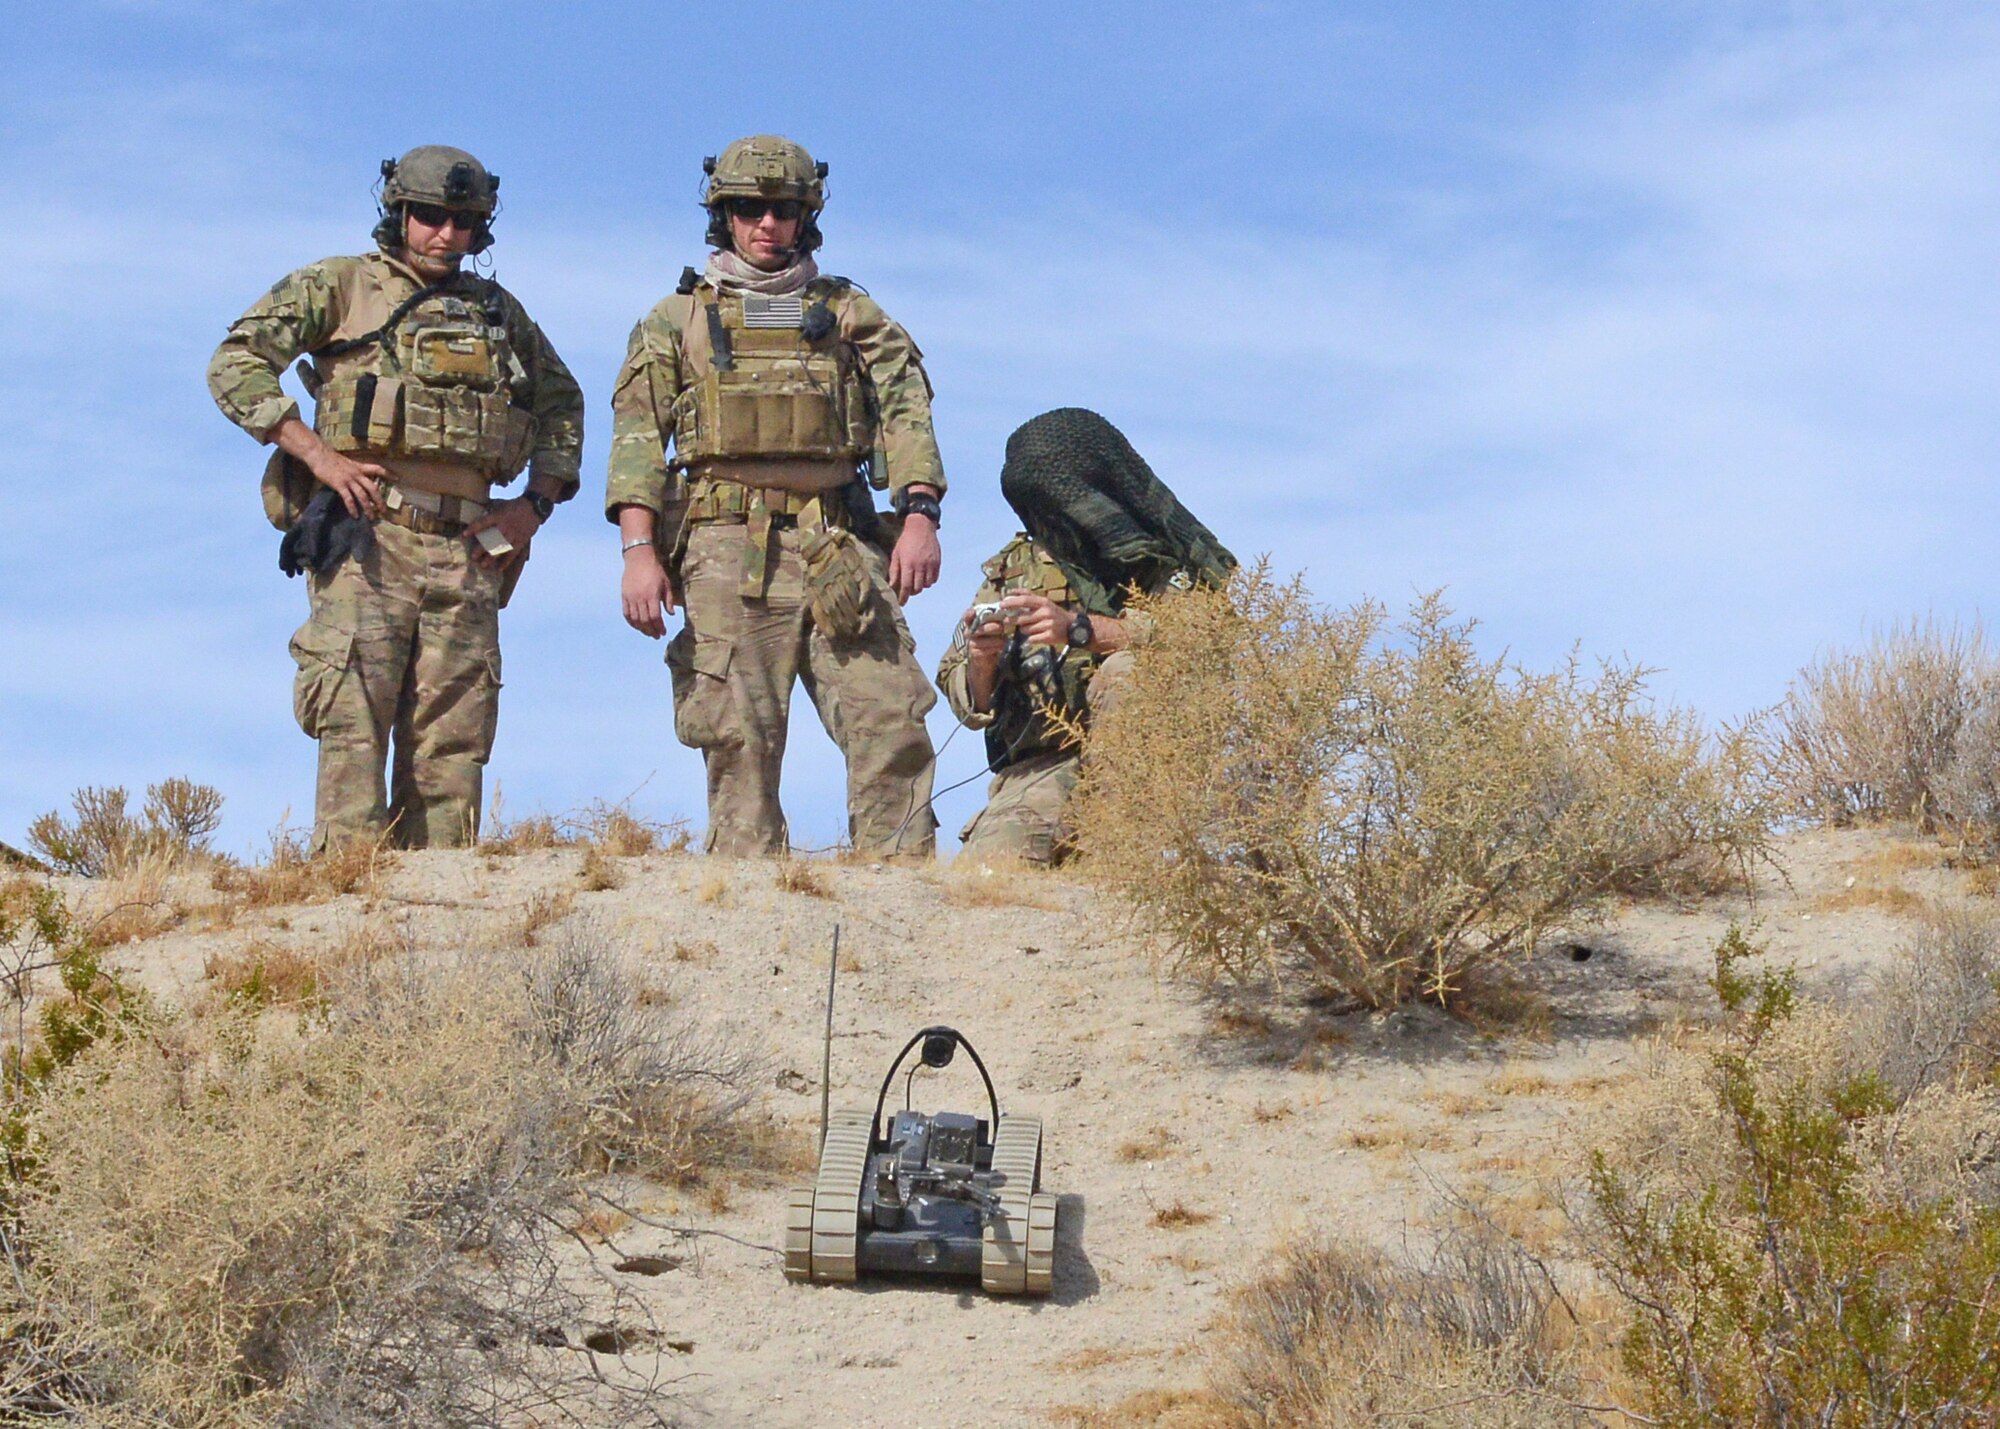 Explosive Ordnance Disposal Airmen deploy an all-terrain robot to inspect a possible booby trap during a two-week long training event and bivouac conducted by the 812th Civil Engineer Explosive Ordnance Flight at Edwards AFB earlier this month. (U.S. Air Force photo by Kenji Thuloweit)